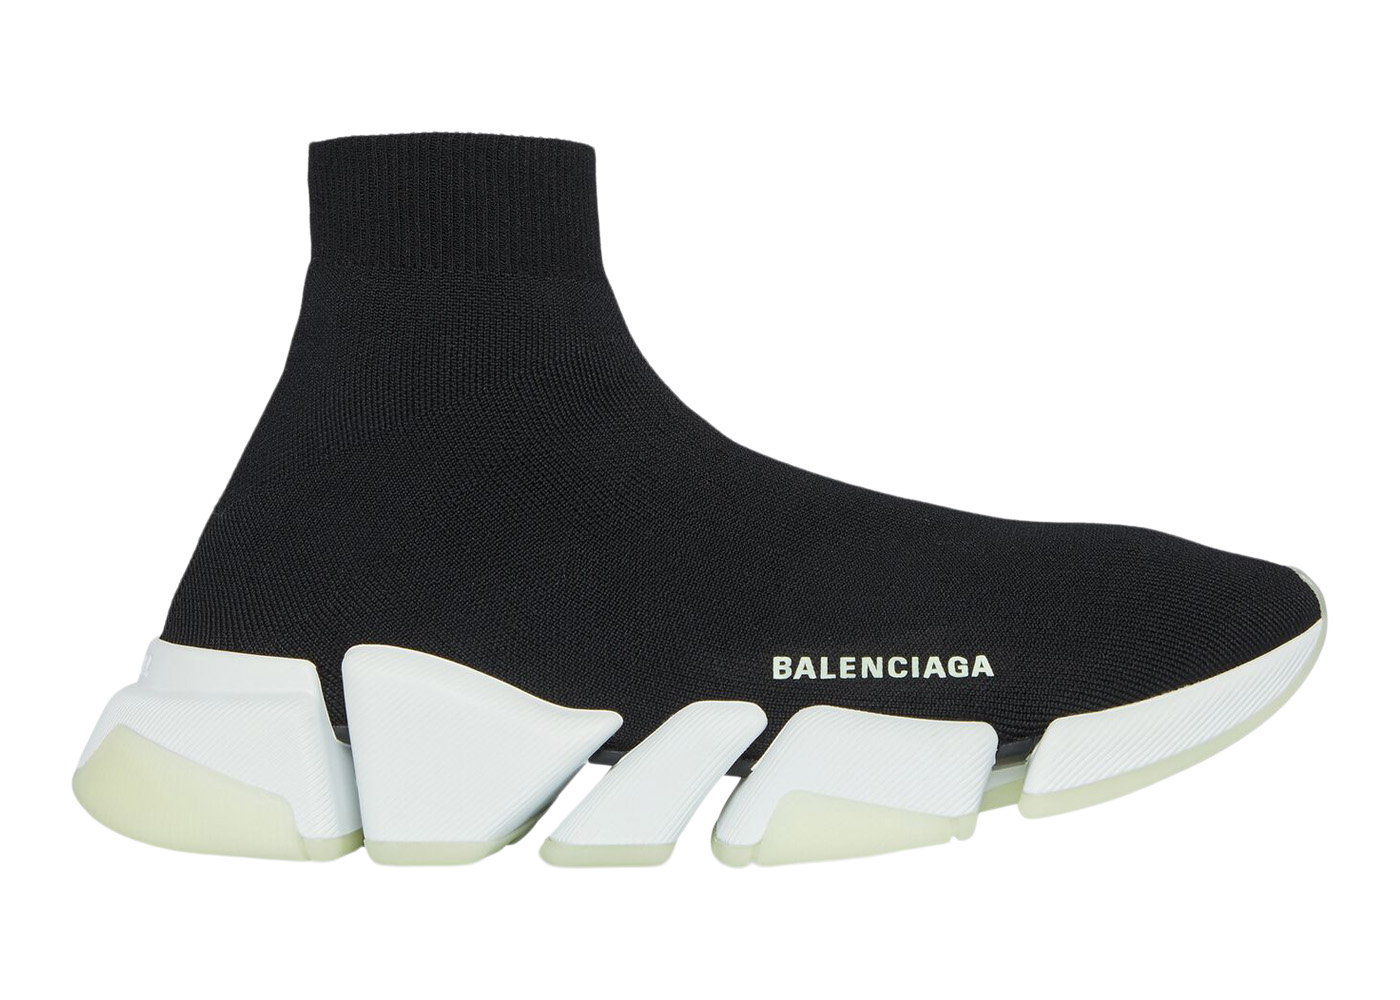 Balenciaga Sneakers outlet  Women  1800 products on sale  FASHIOLAcouk